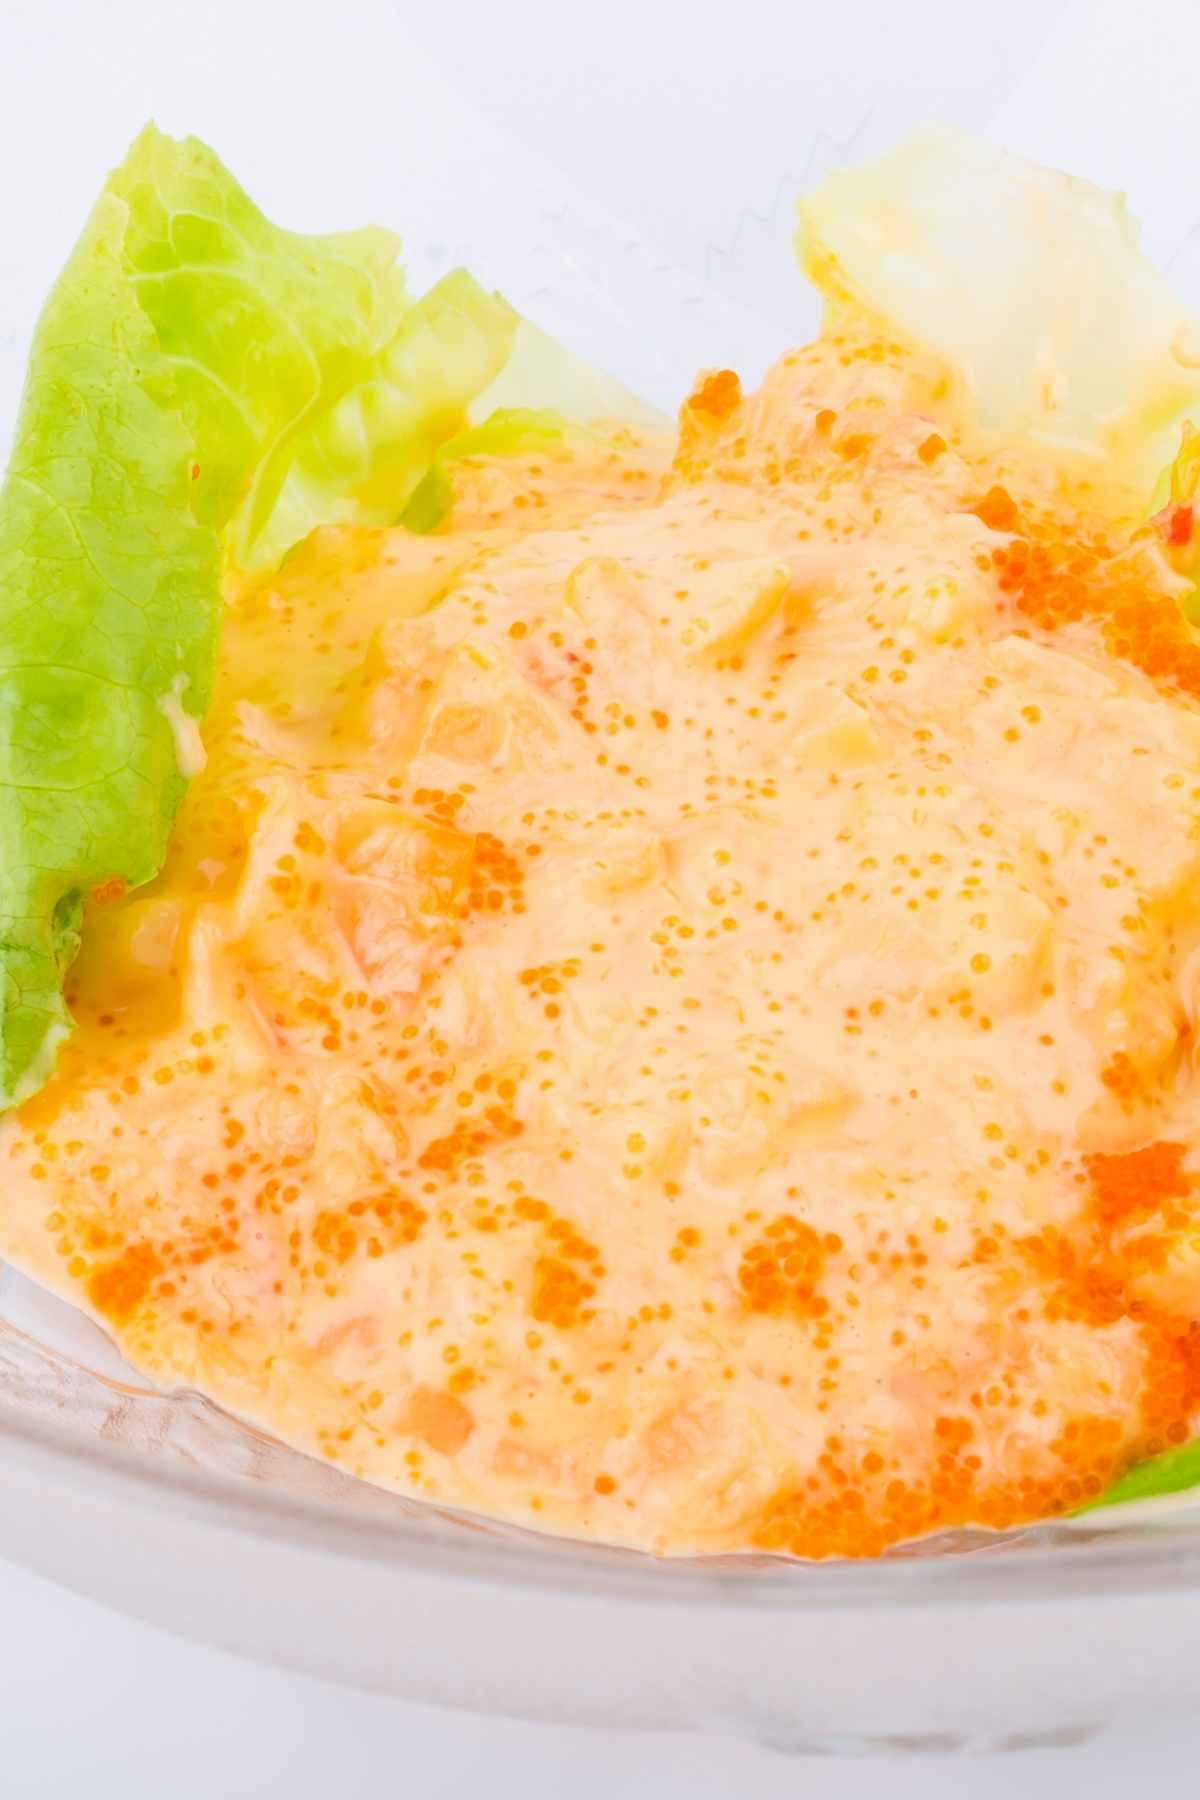 If you love sushi, you’ve probably had Tobiko Sauce. It’s a creamy sauce that’s often served with seafood, salads, and sushi at Japanese restaurants.